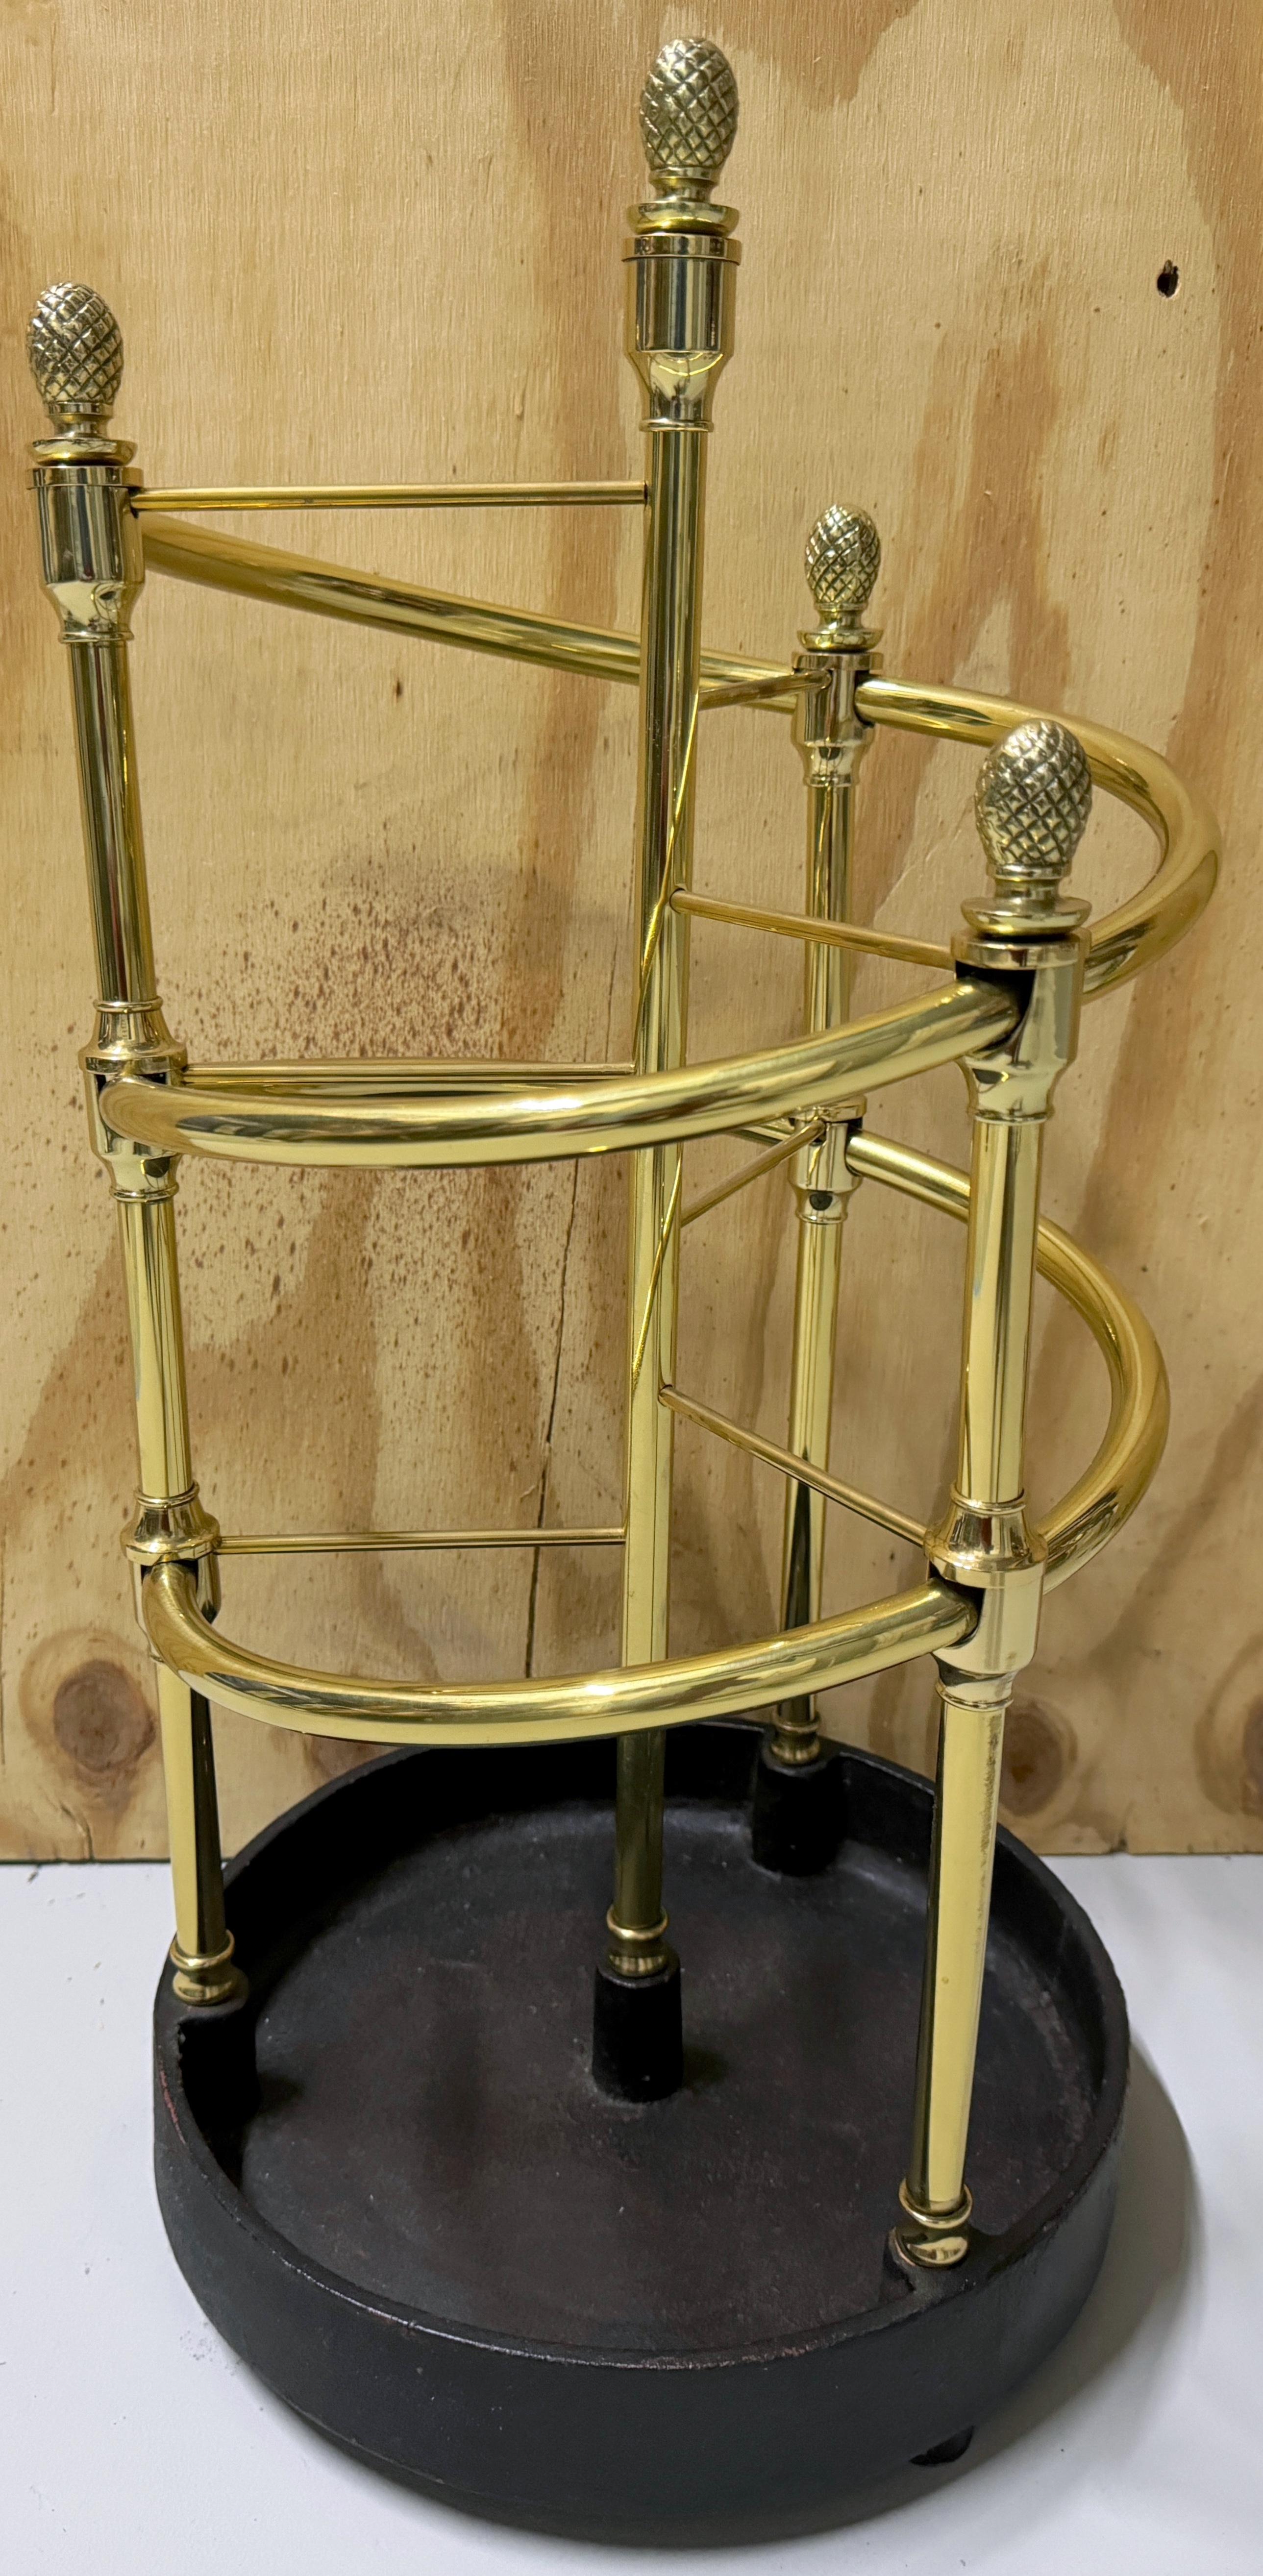 English Regency Style 'Spiral' Brass & Iron Umbrella/ Cane Stand  
England, 20th Century 

A sheik English regency style brass & iron umbrella/cane stand hailing from 20th Century England. This elegant stand stands at a height of 24 inches and